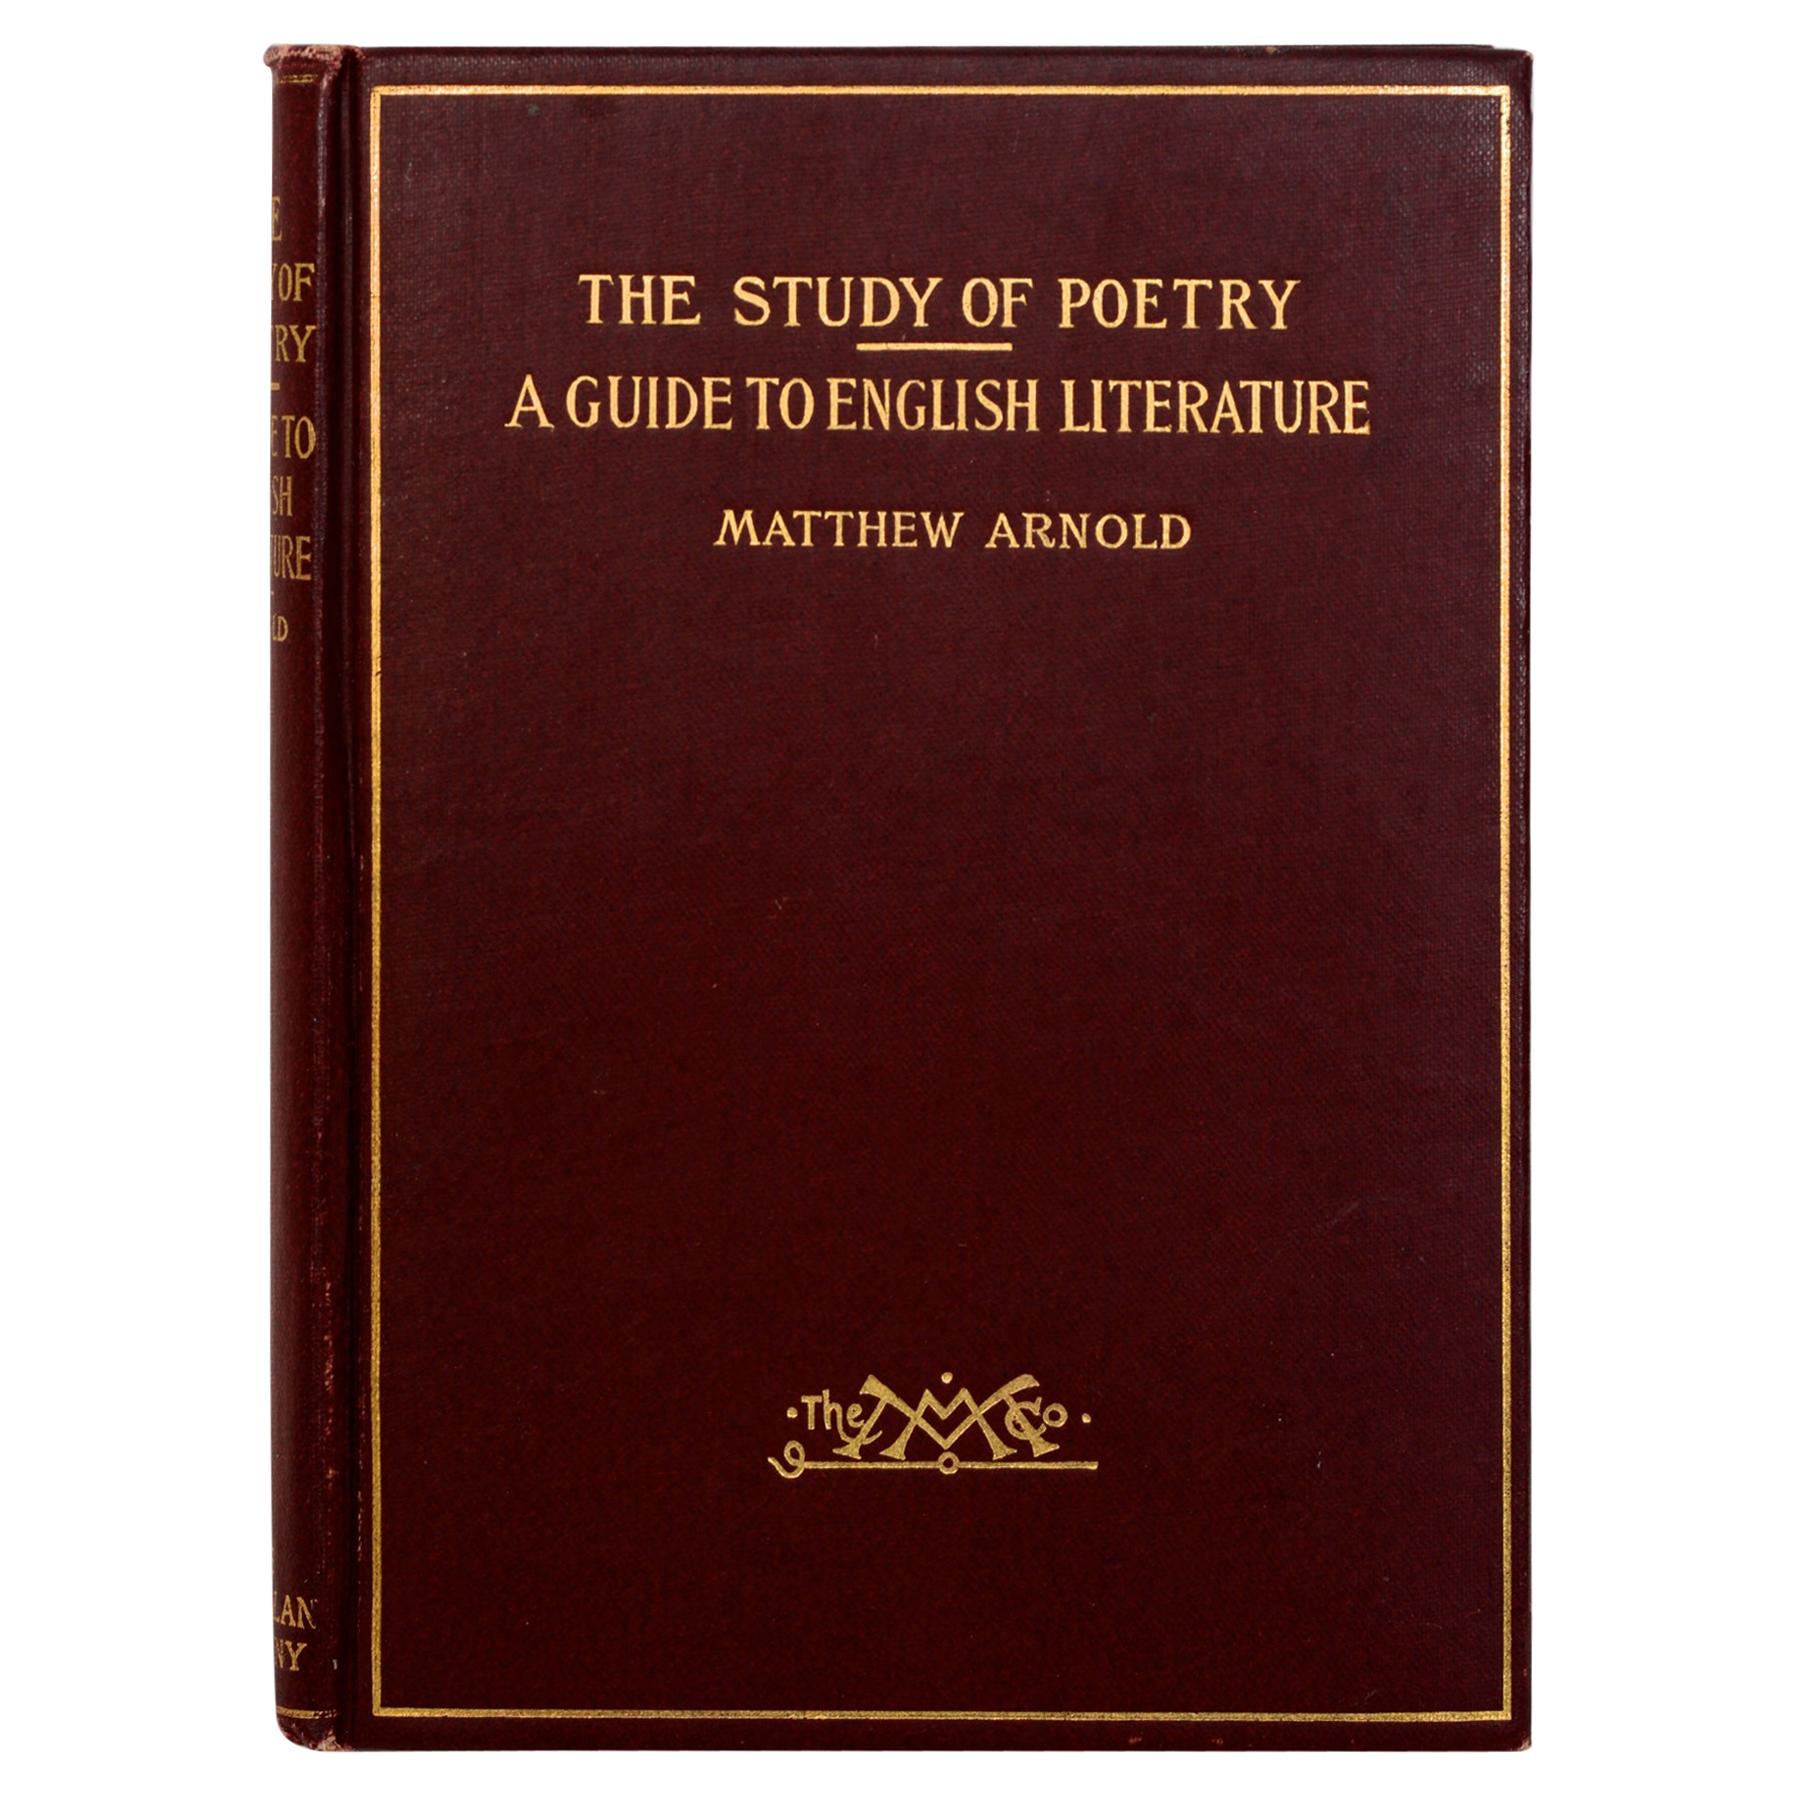 Essays on the Study of Poetry & a Guide to English Literature by Matthew Arnold